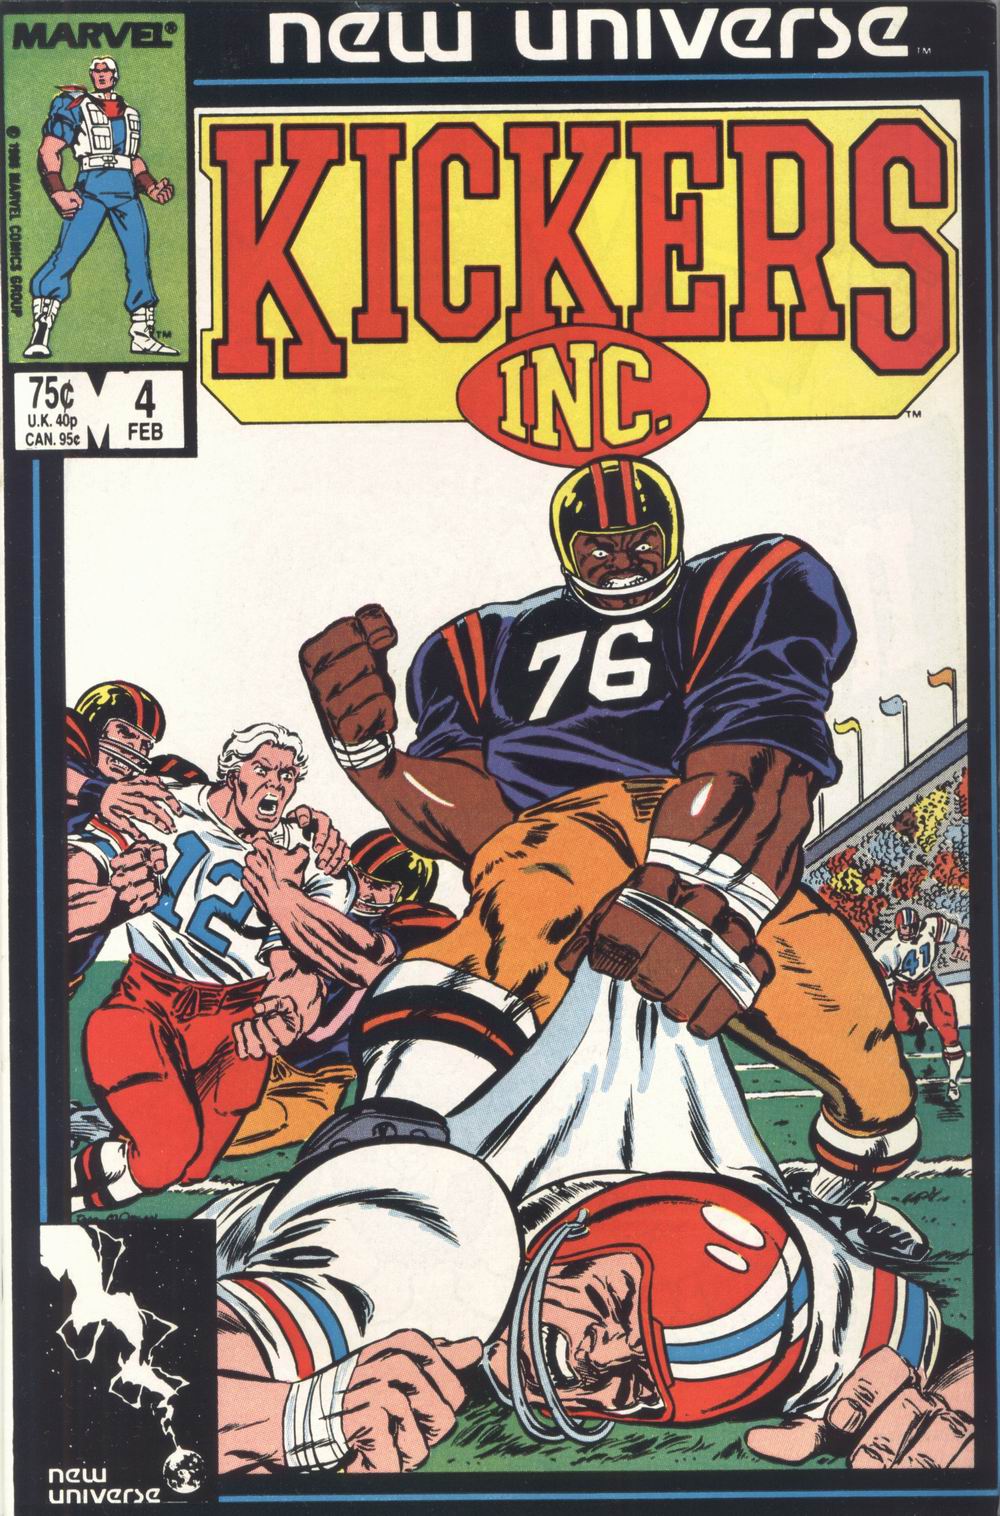 Read online Kickers, Inc. comic -  Issue #4 - 1